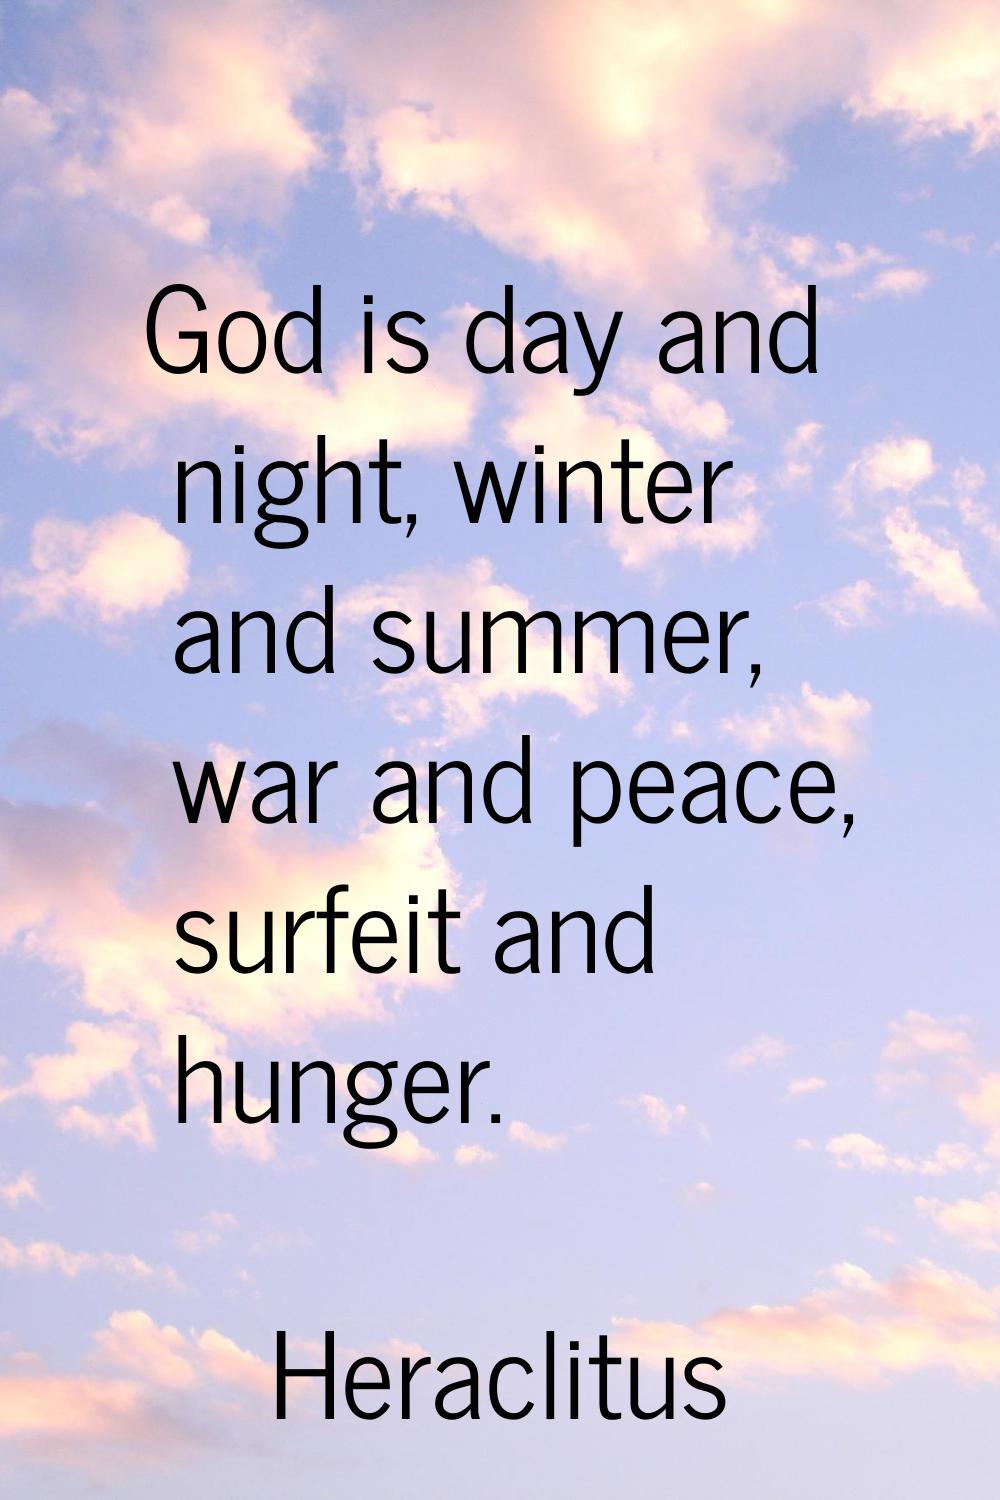 God is day and night, winter and summer, war and peace, surfeit and hunger.